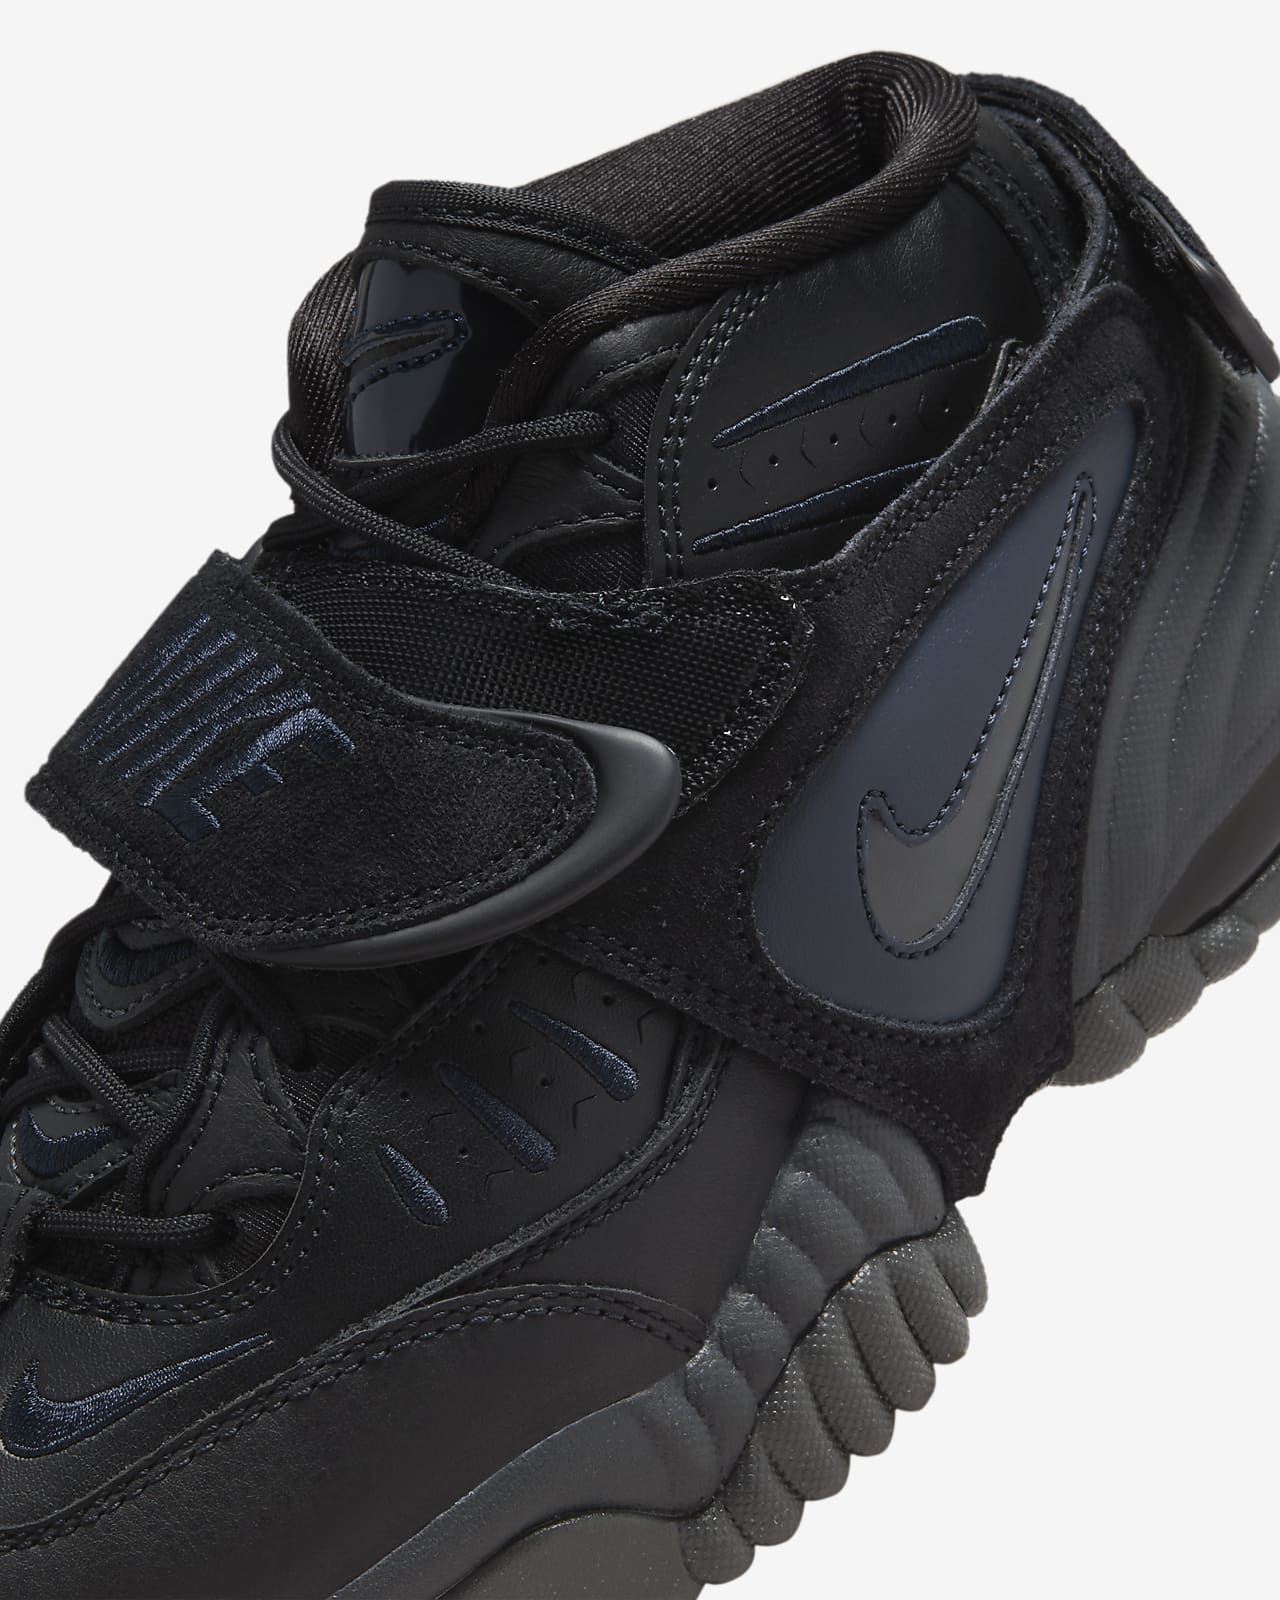 The Nike Air Barrage Low has returned in a near original Black